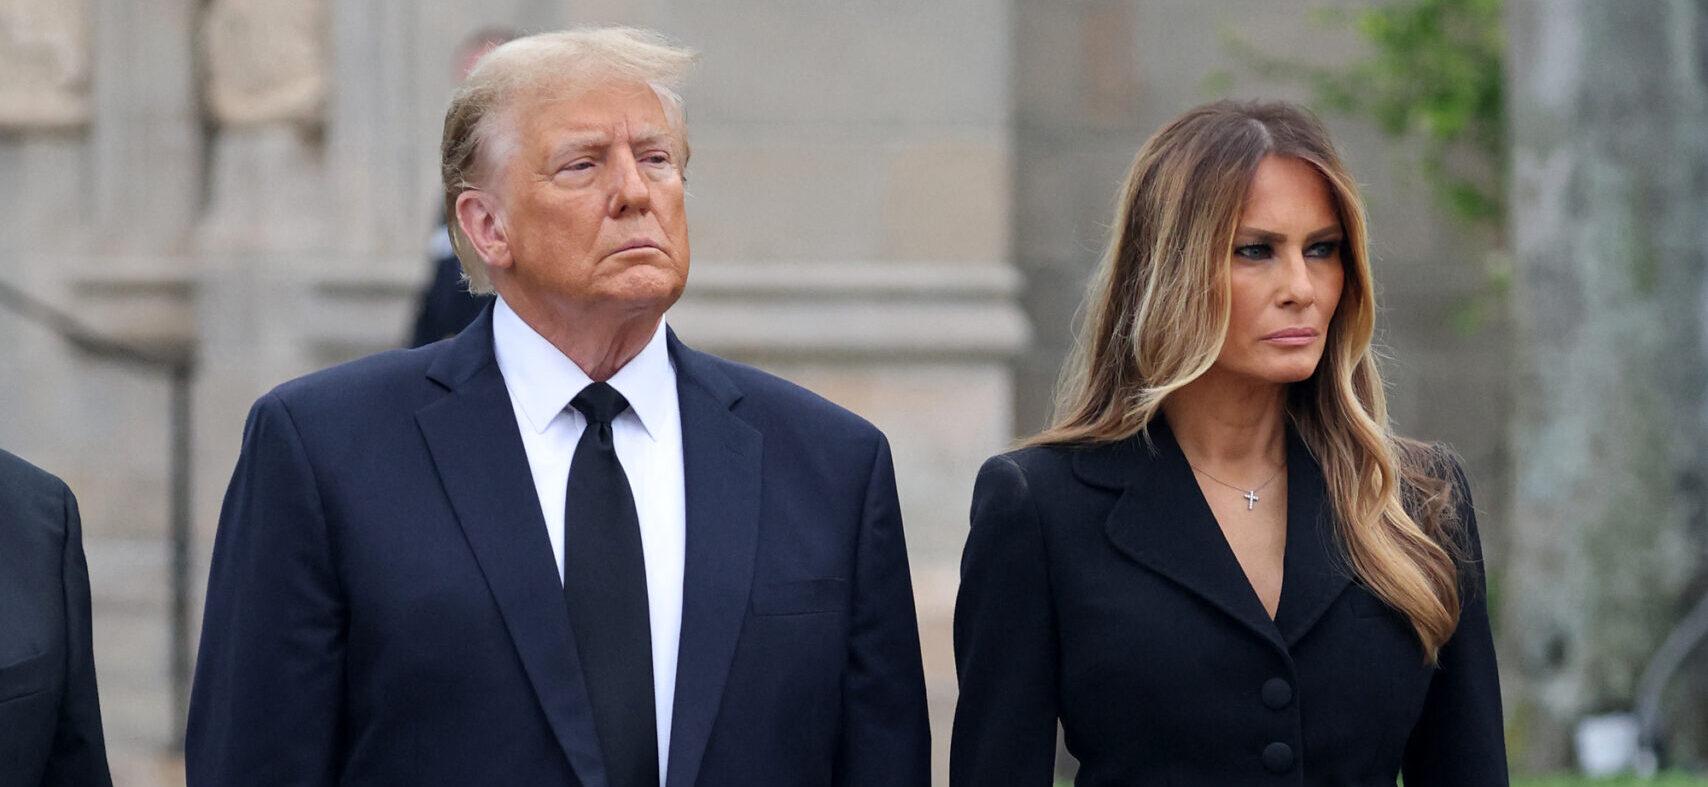 Donald Trump's Marriage To Melania Is Allegedly Only About 'Business And Not Pleasure'